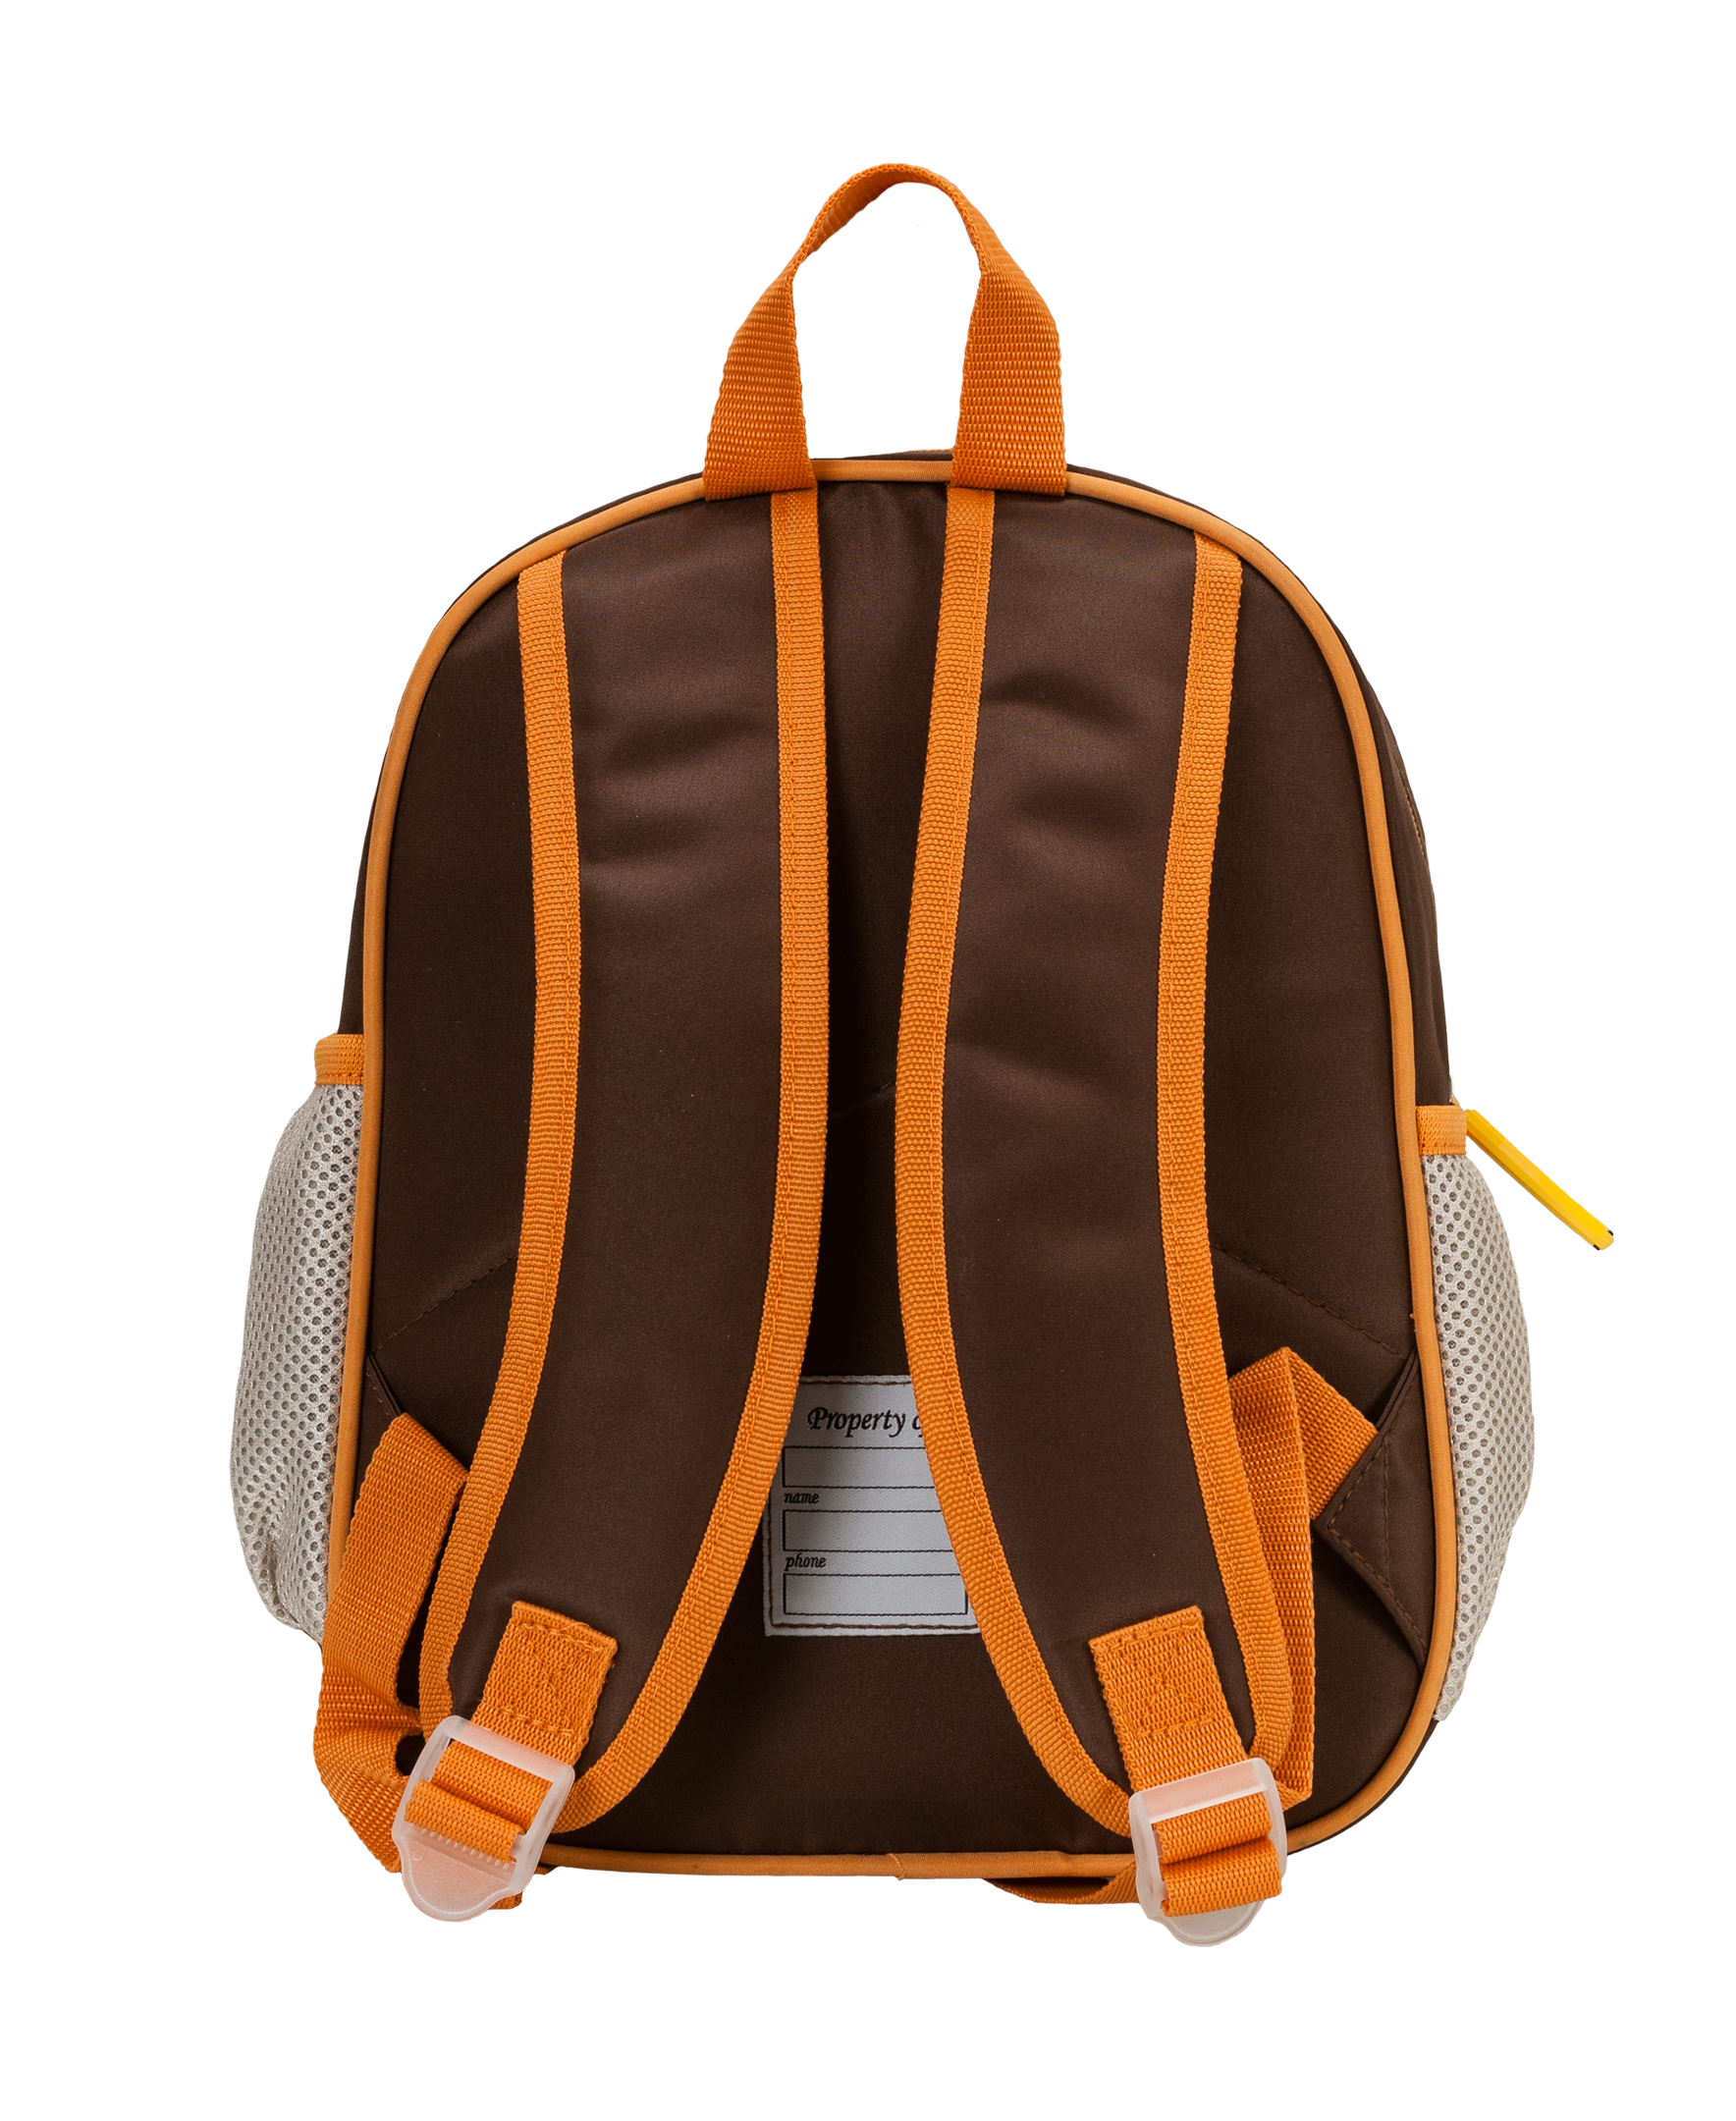 Rockland Luggage "My First Backpack" Kids Backpack - image 2 of 8